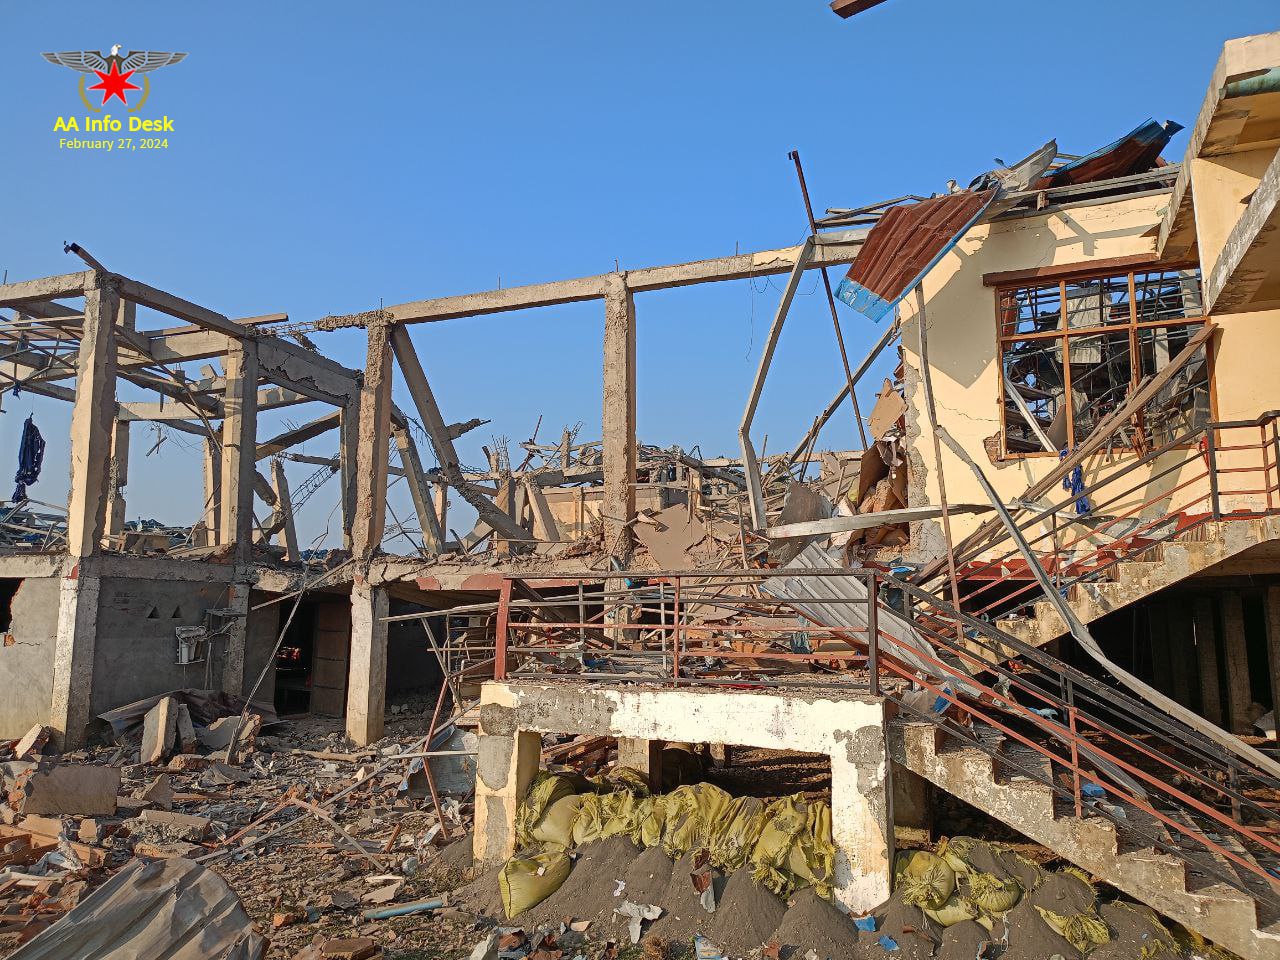 The Minphu rural healthcare centre in Minbya Township was destroyed by a junta airstrike in February.